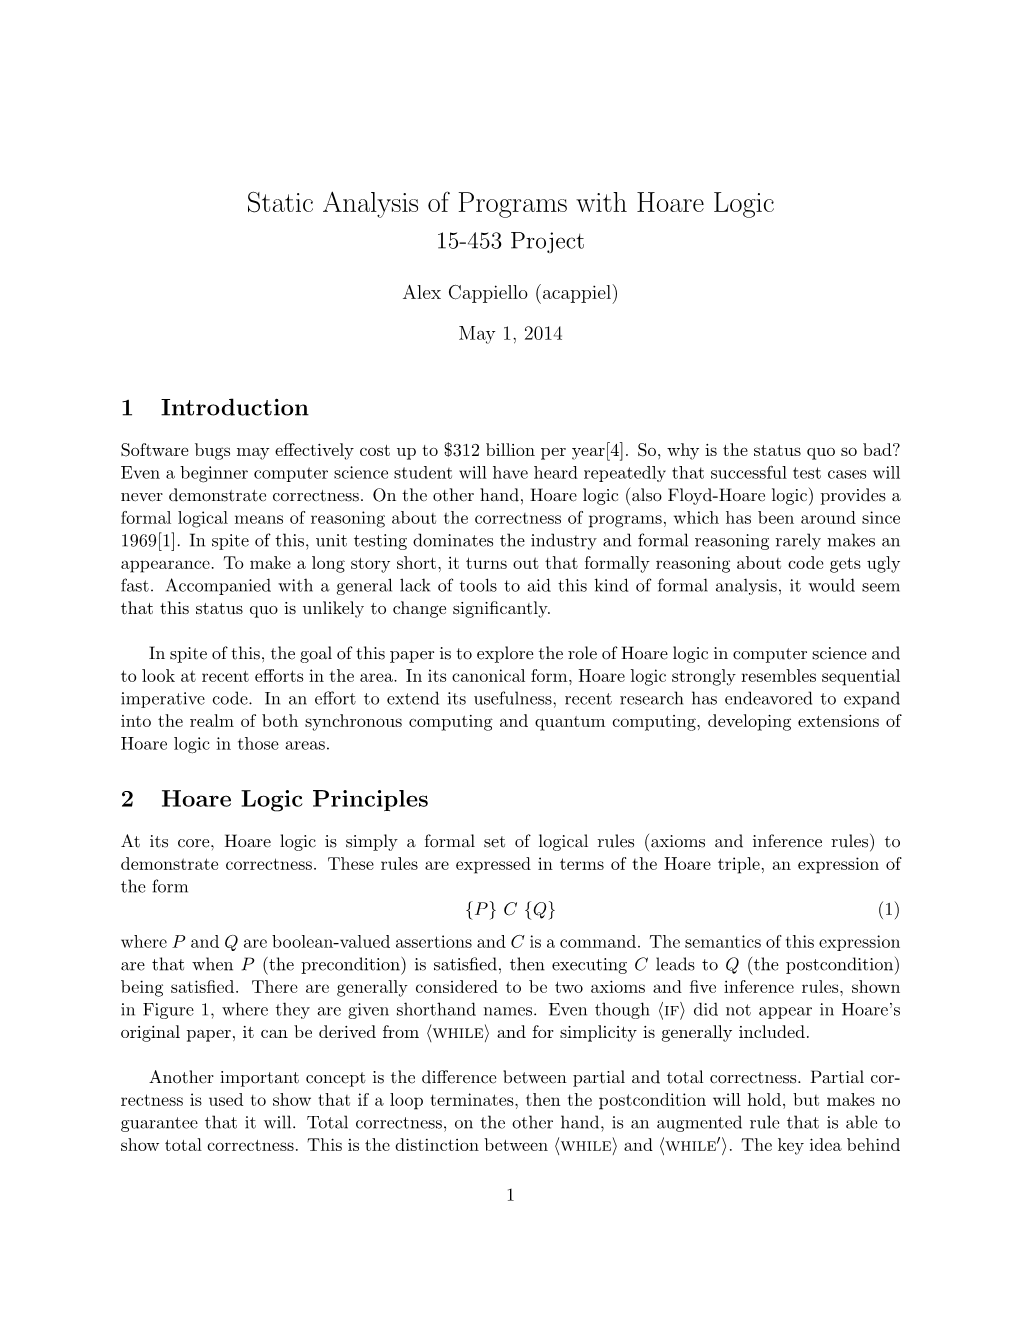 Static Analysis of Programs with Hoare Logic 15-453 Project